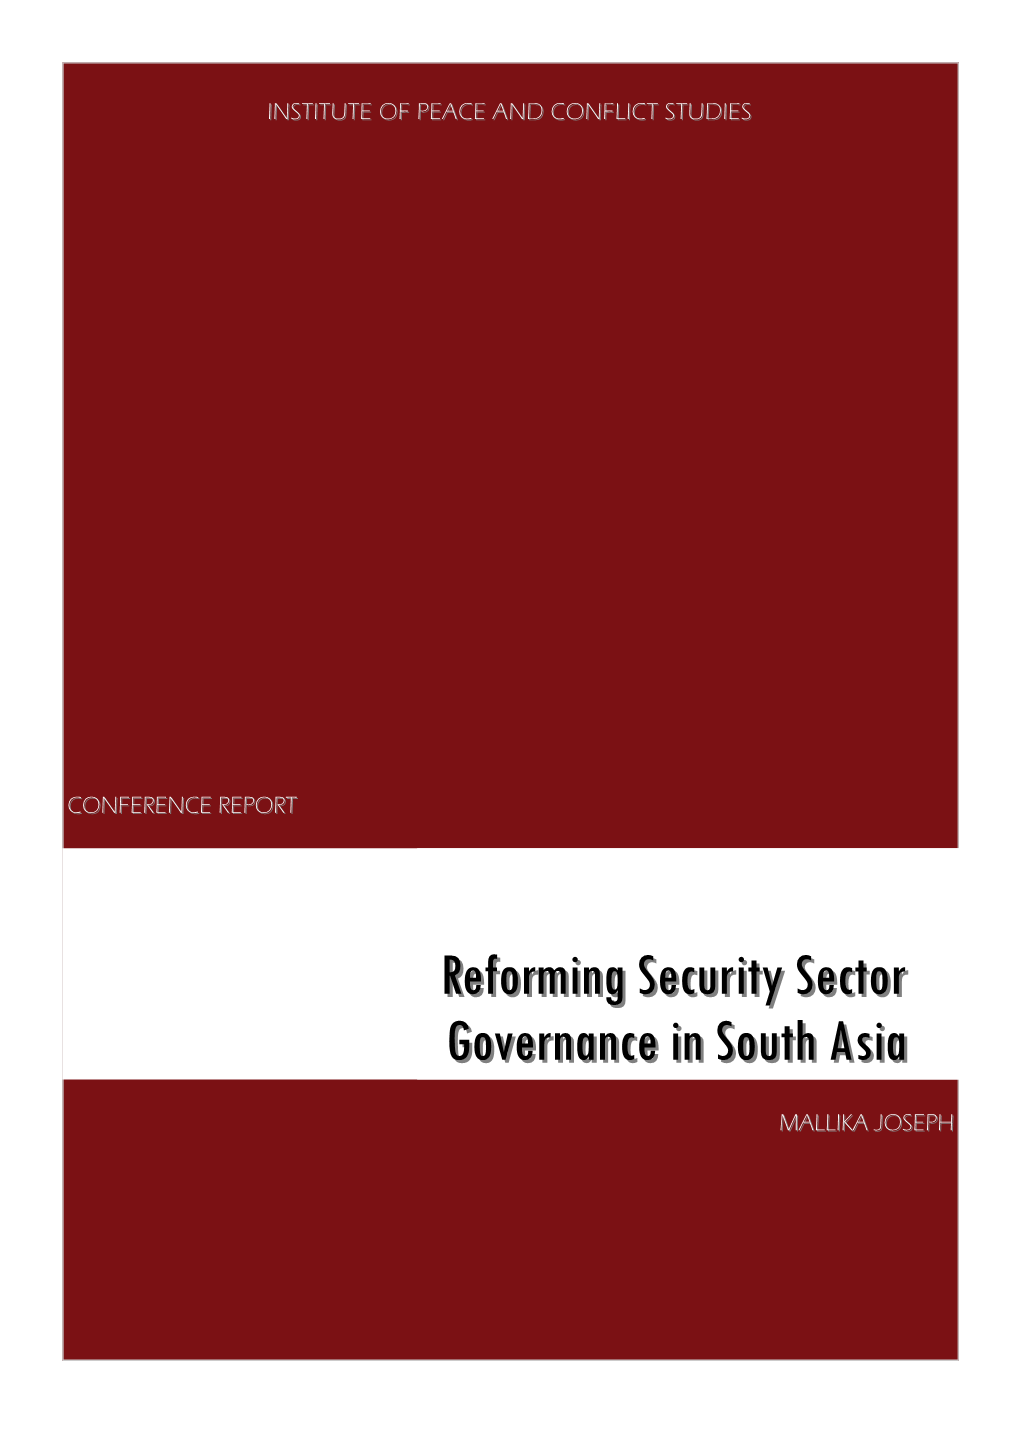 Reforming Security Sector Governance in South Asia Organized by the IPCS in April 2008 in Bangkok